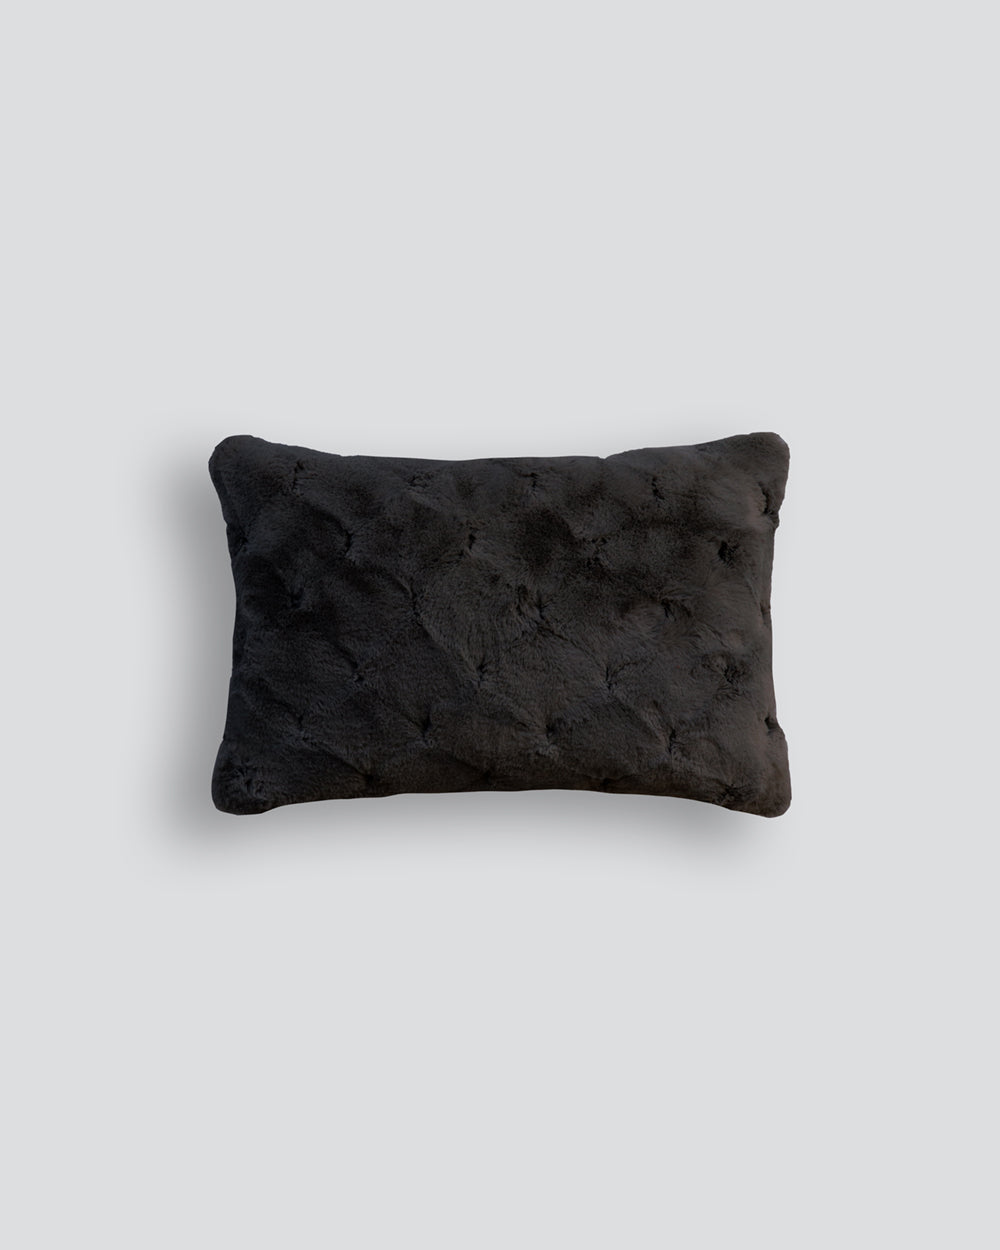 Heirloom Valentina Black Cushions in Faux Fur are available from Make Your House A Home Premium Stockist. Furniture Store Bendigo, Victoria. Australia Wide Delivery. Furtex Baya.